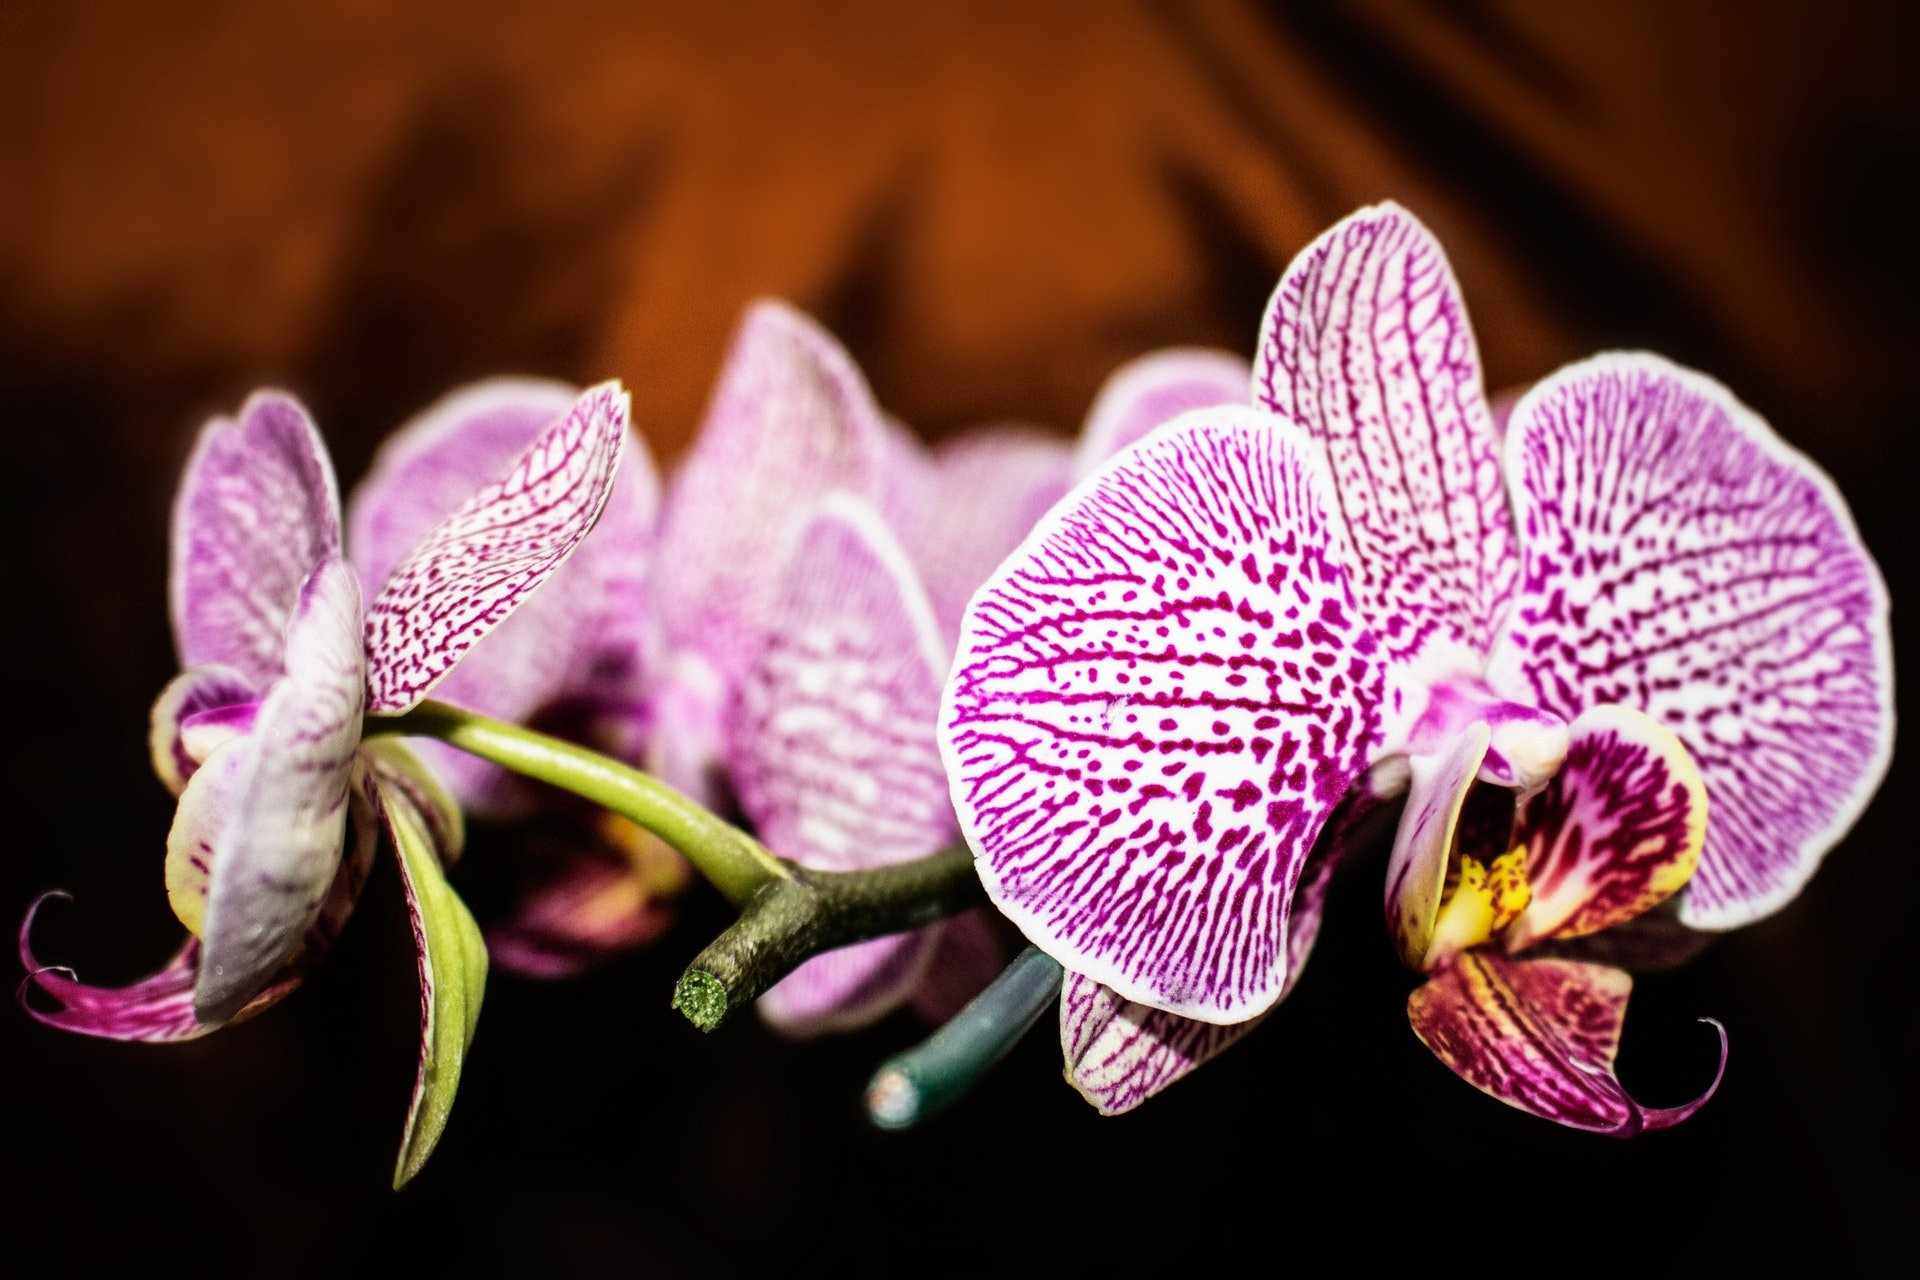 https://0201.nccdn.net/4_2/000/000/008/486/purple-and-white-moth-orchid-flowers-in-selective-focus-1621168-1920x1280-1920x1280.jpg